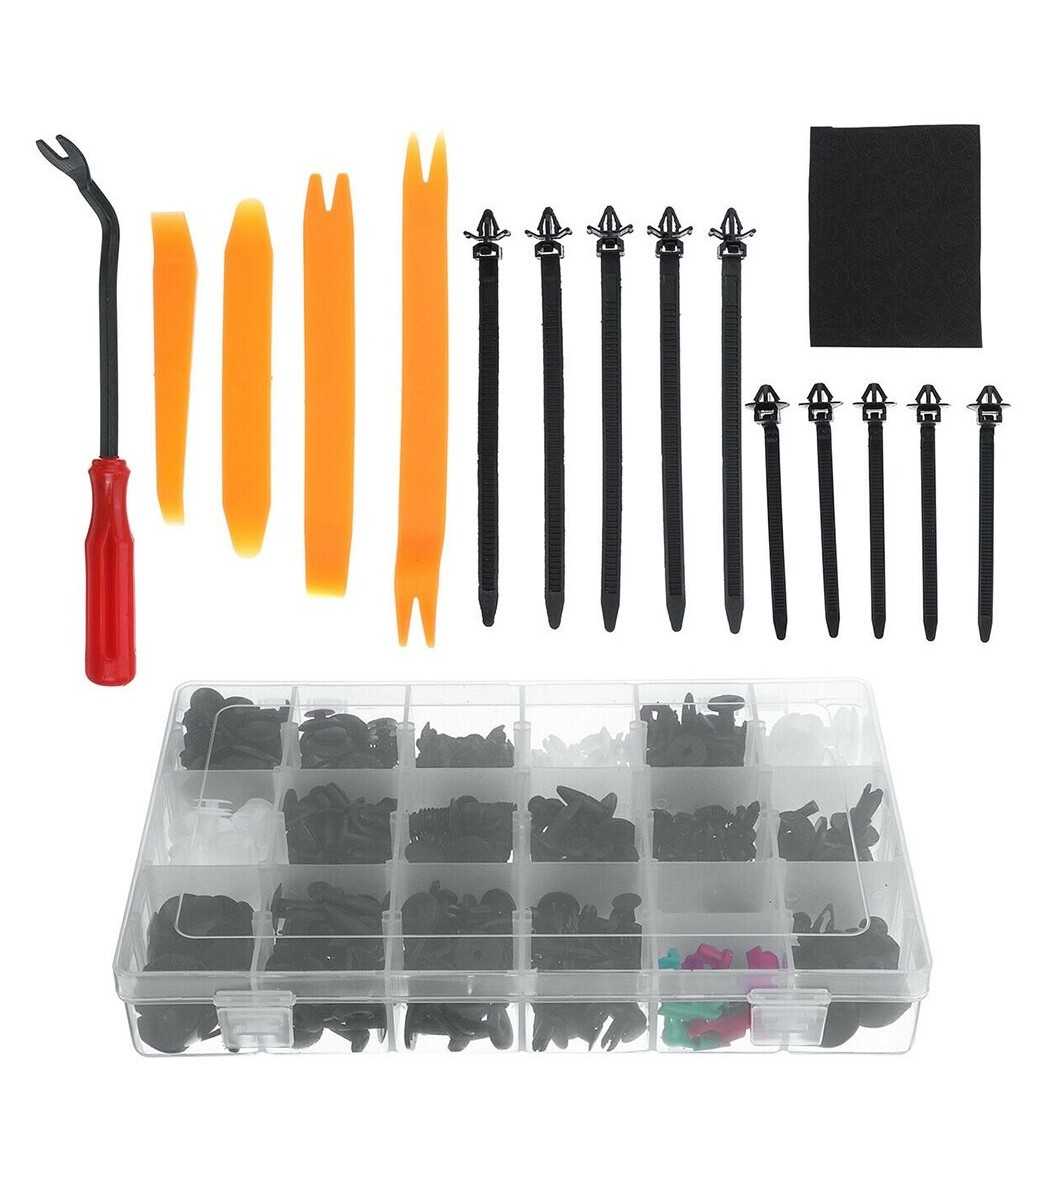 https://electronicroom.eu/39506-large_default/460-pcs-auto-body-retainer-clips-plastic-fasteners-set-with-tool-for-gm-ford-door-trim-panel-retainer-fastener-kit.jpg